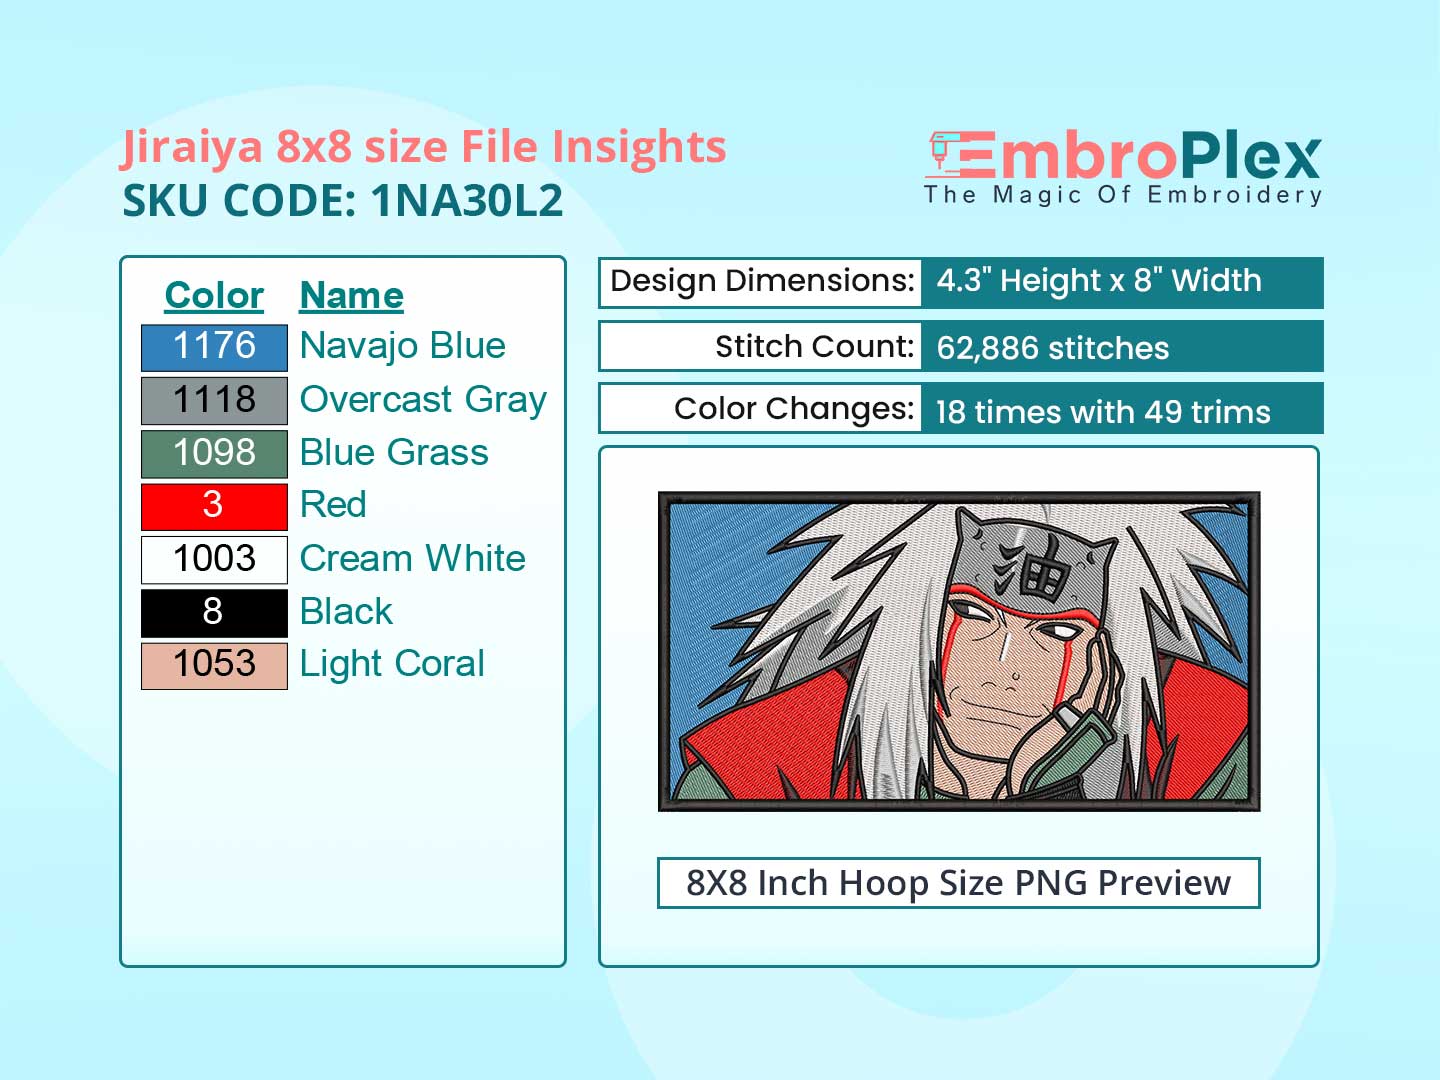 Anime-Inspired Jiraiya Embroidery Design File - 8x8 Inch hoop Size Variation overview image